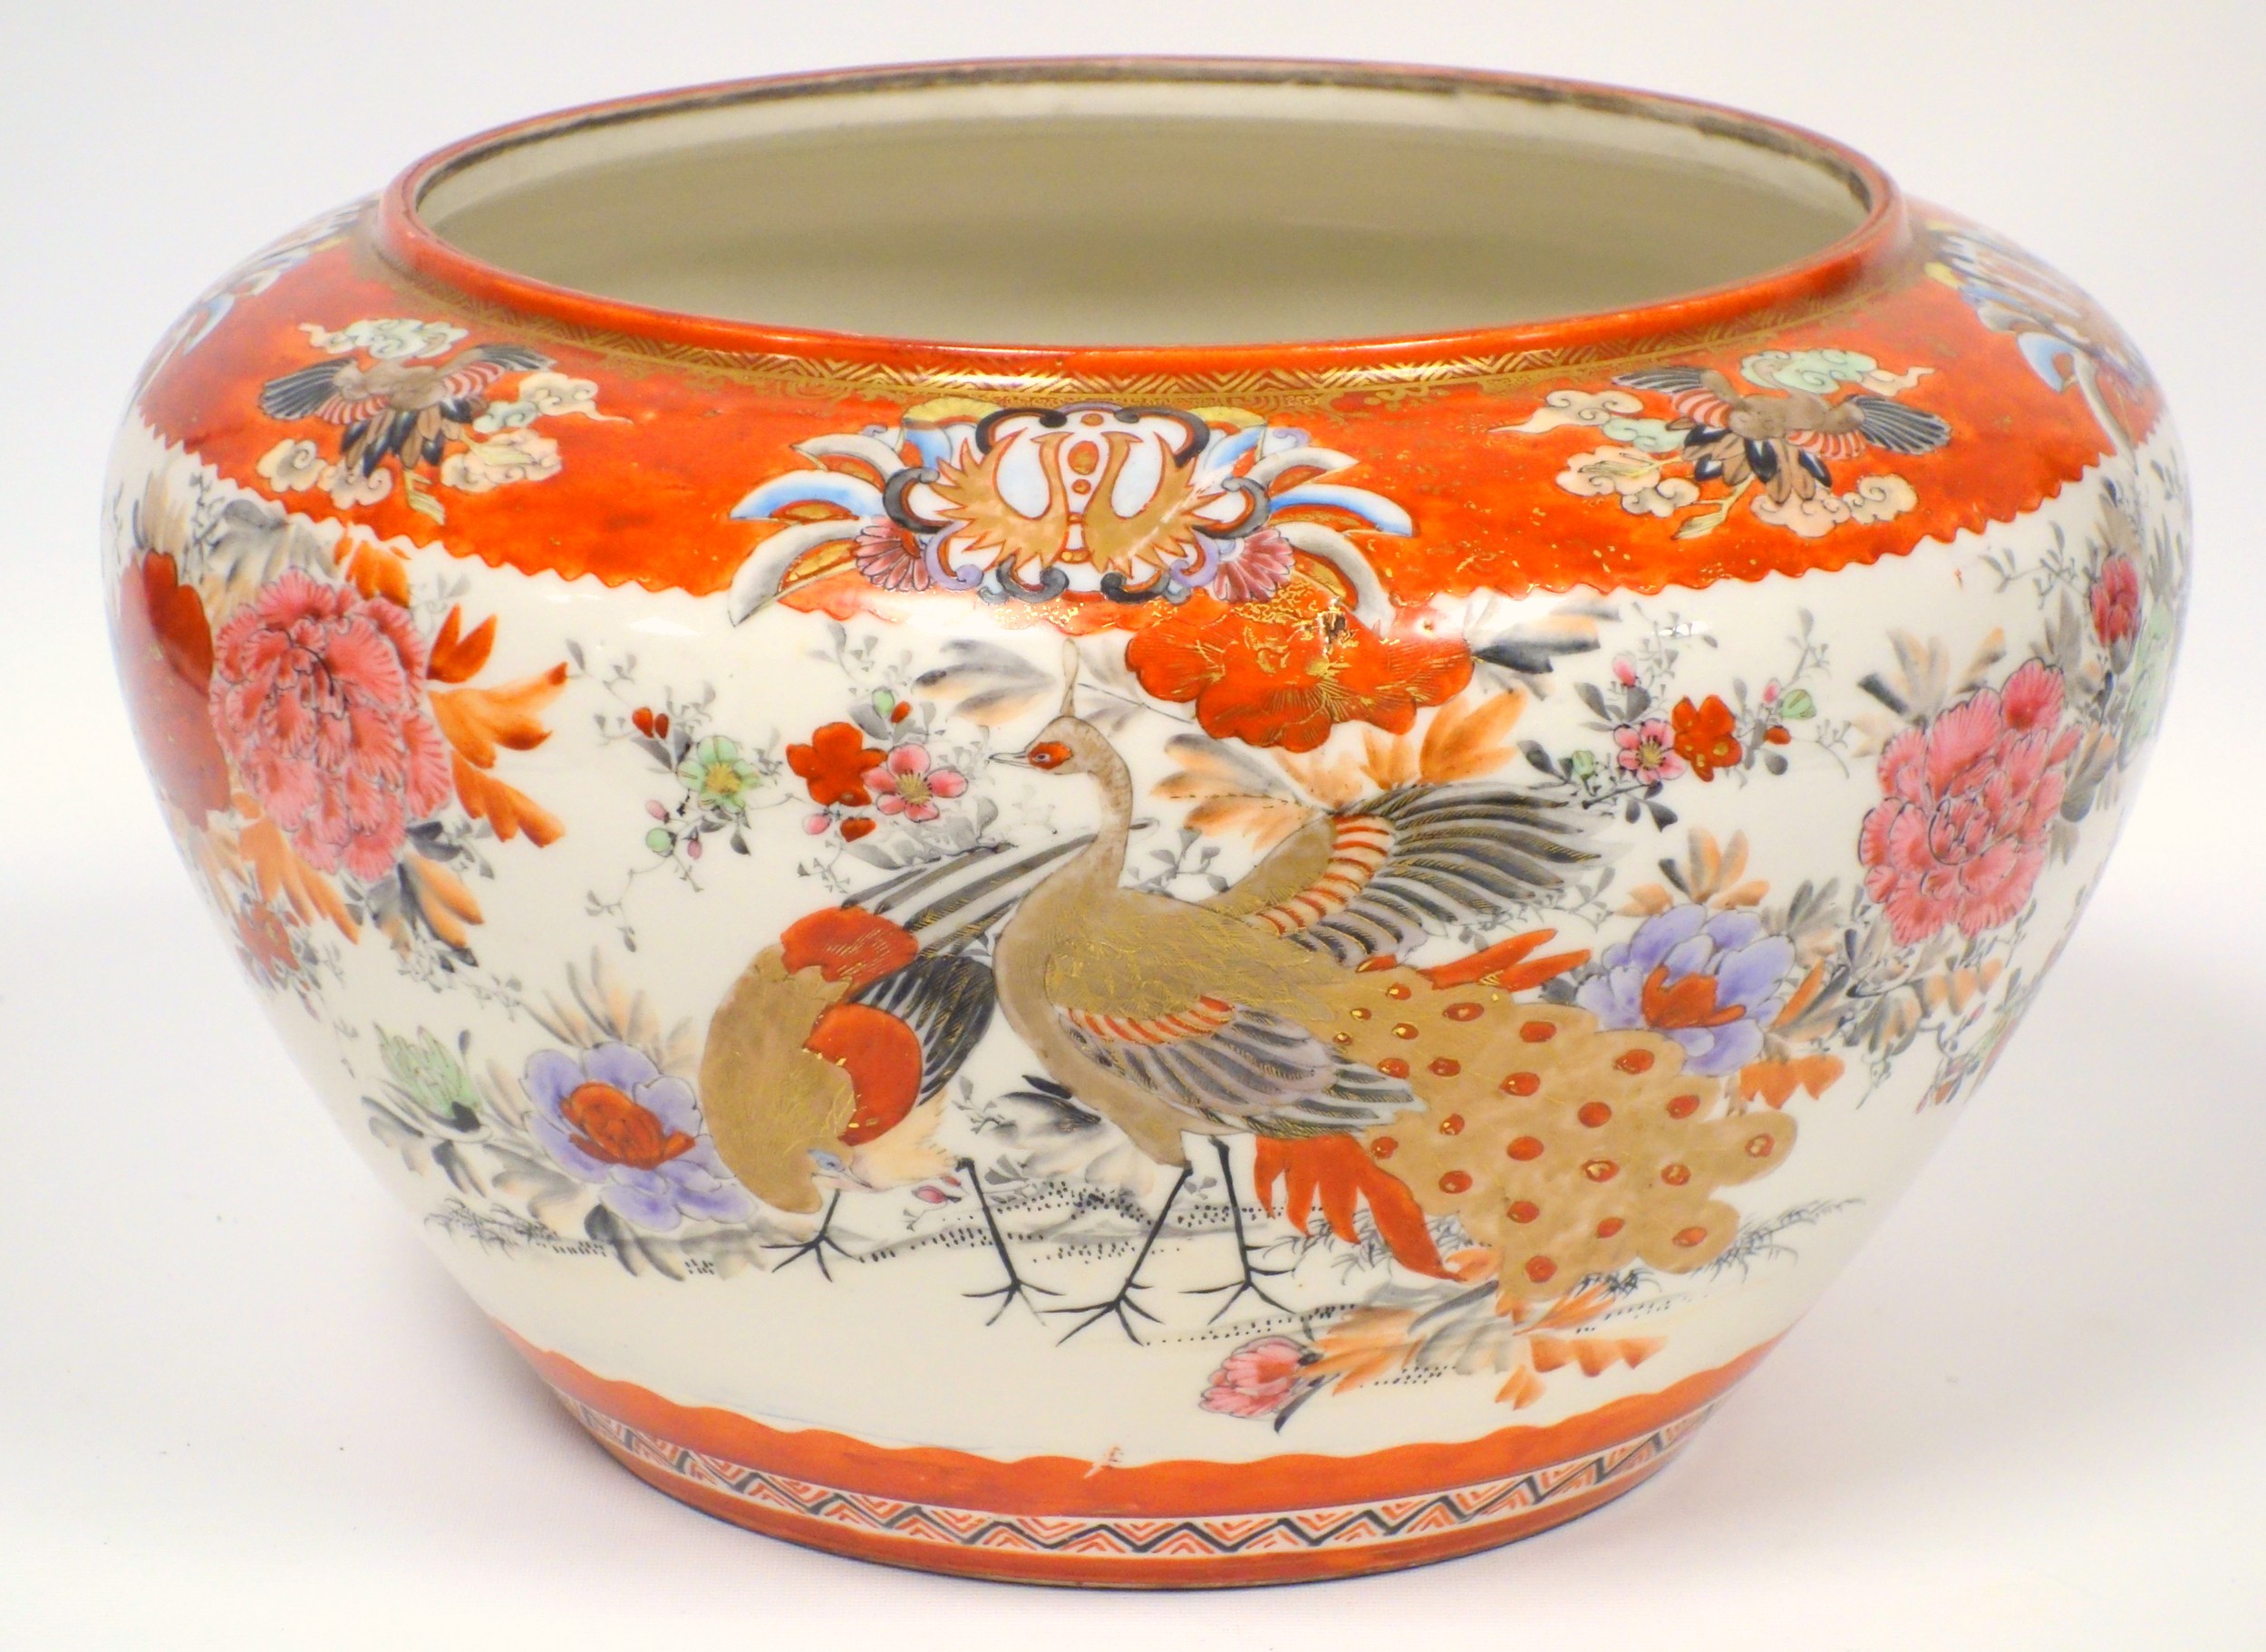 Late 19th century Japanese Kutani porcelain circular bowl painted with peacocks, other birds and